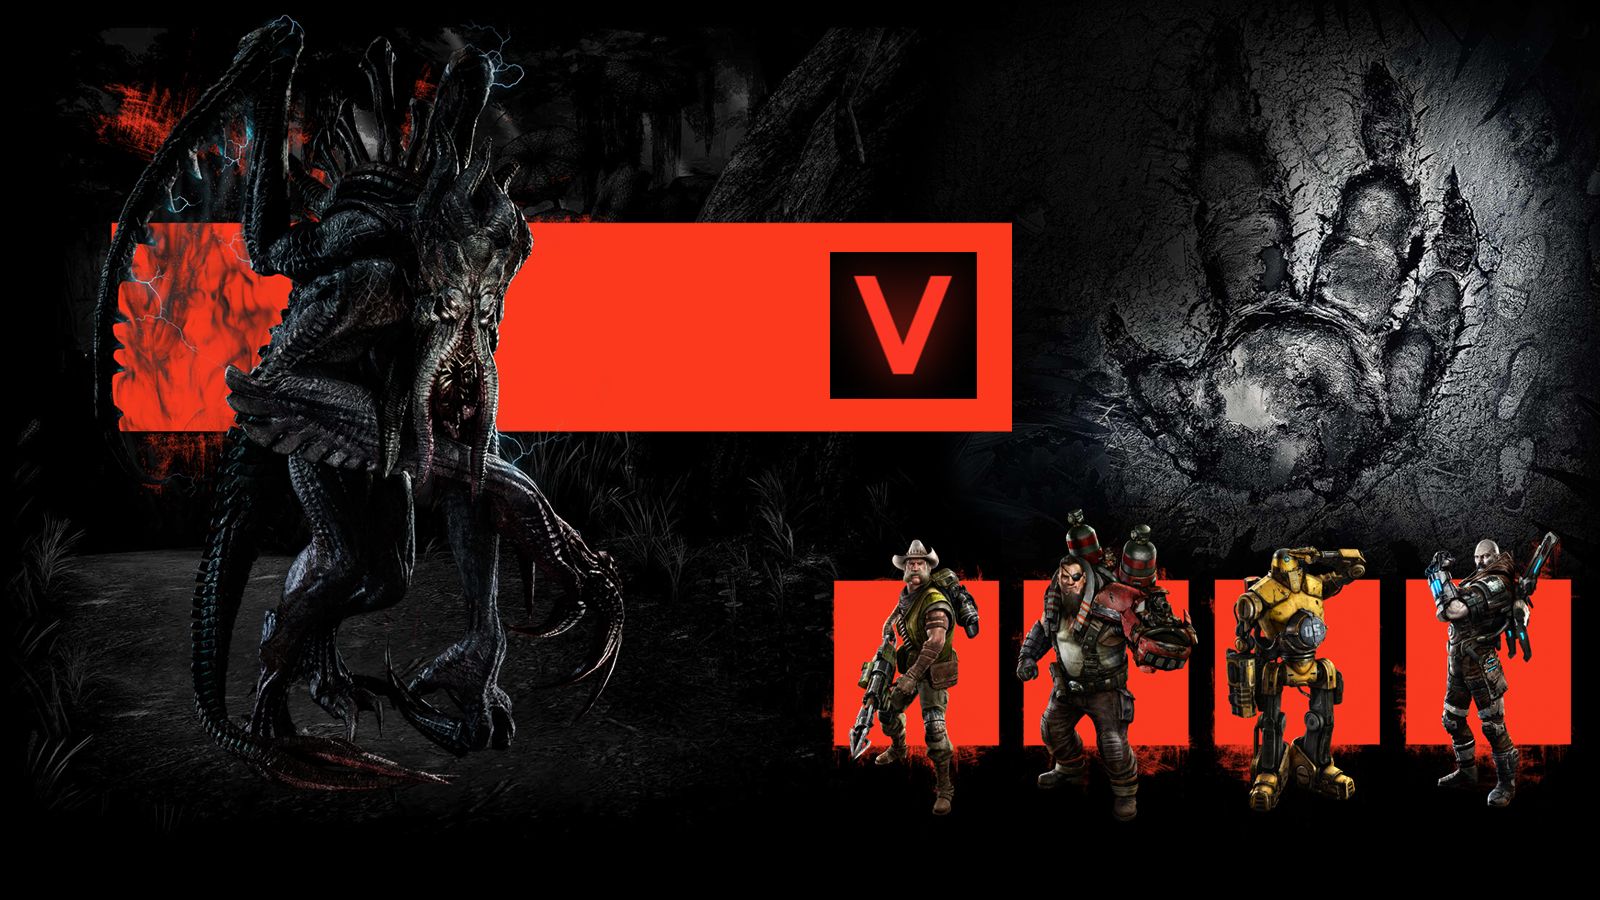 Evolve characters - roles 1v4